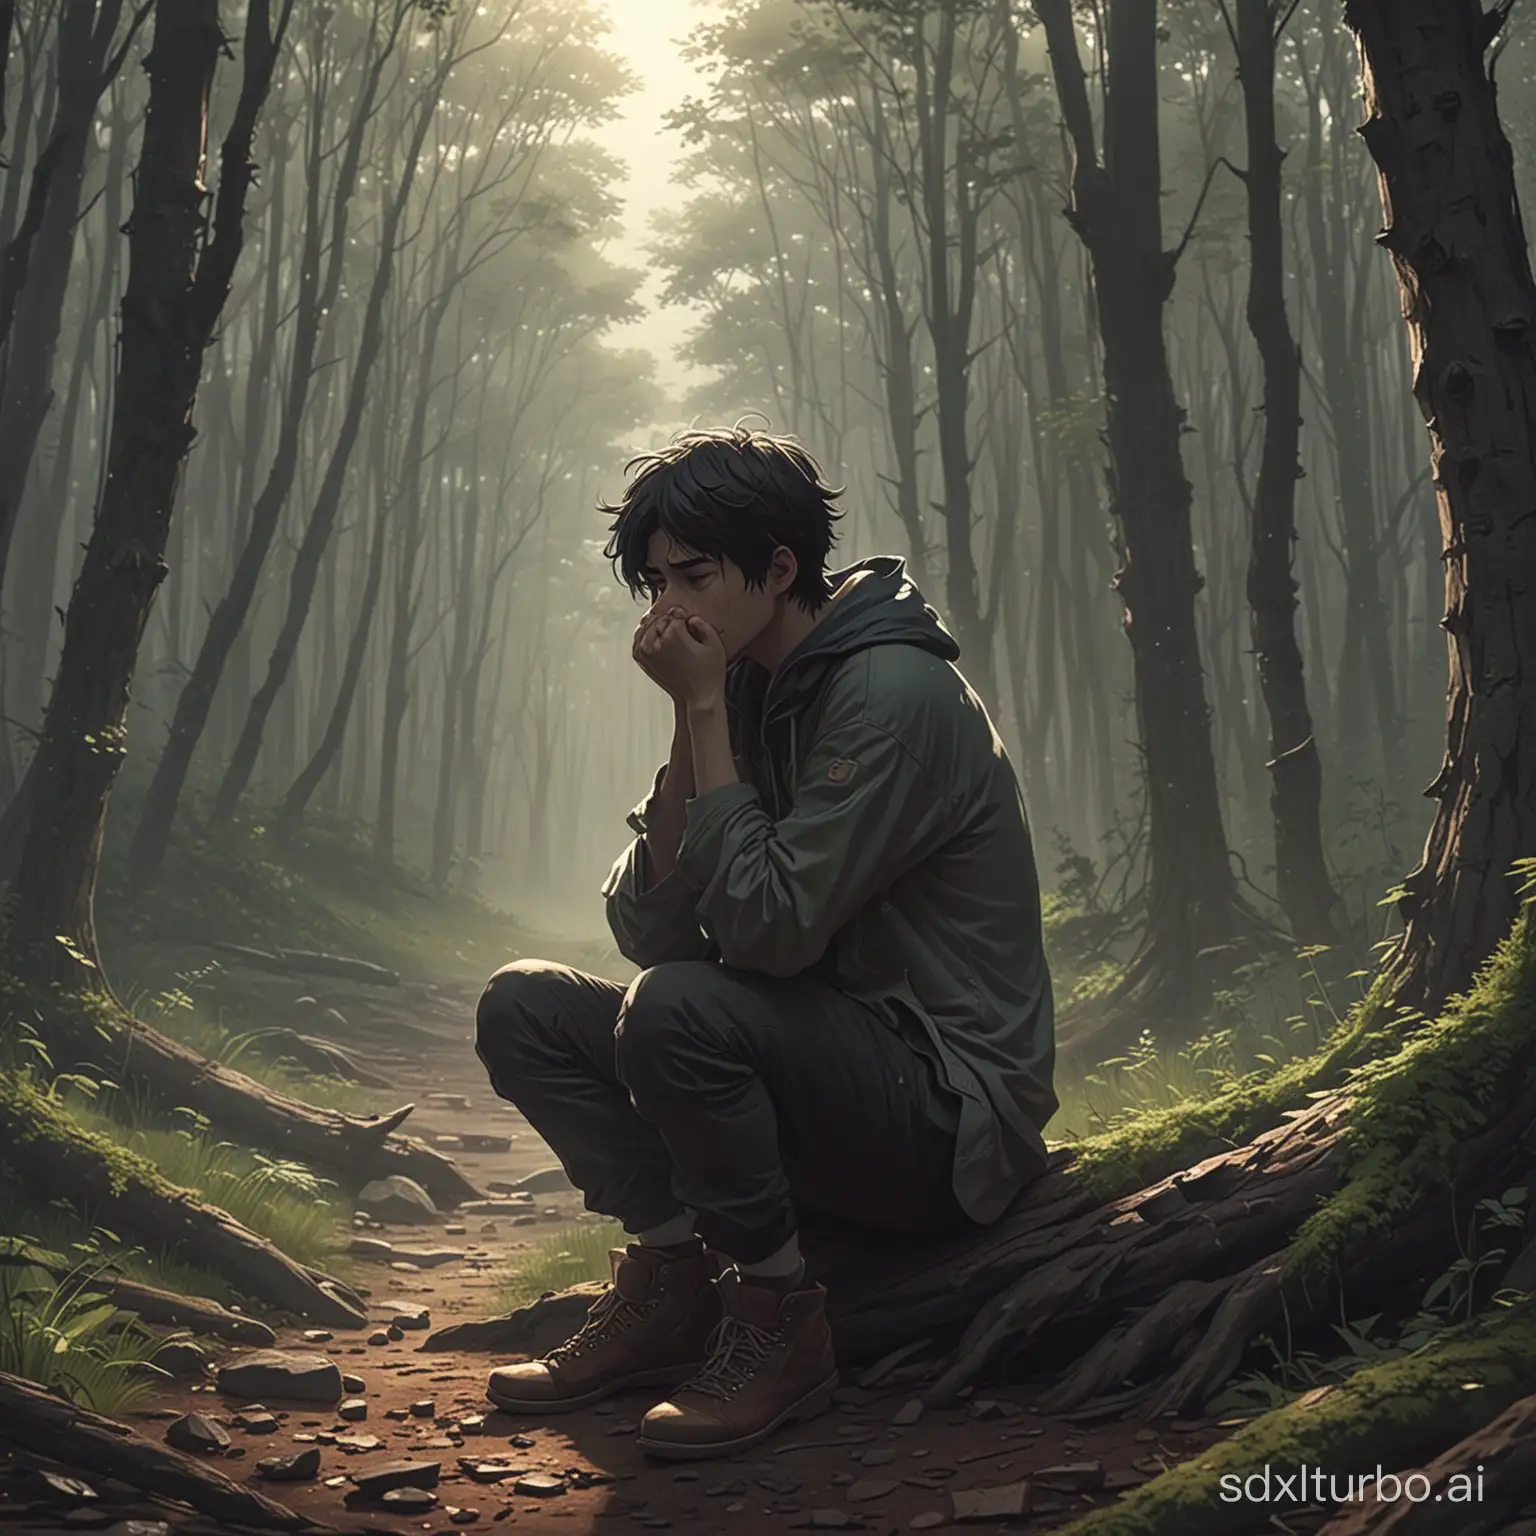 Solitary-Figure-in-Forest-Deep-in-Emotional-Contemplation-Anime-Style